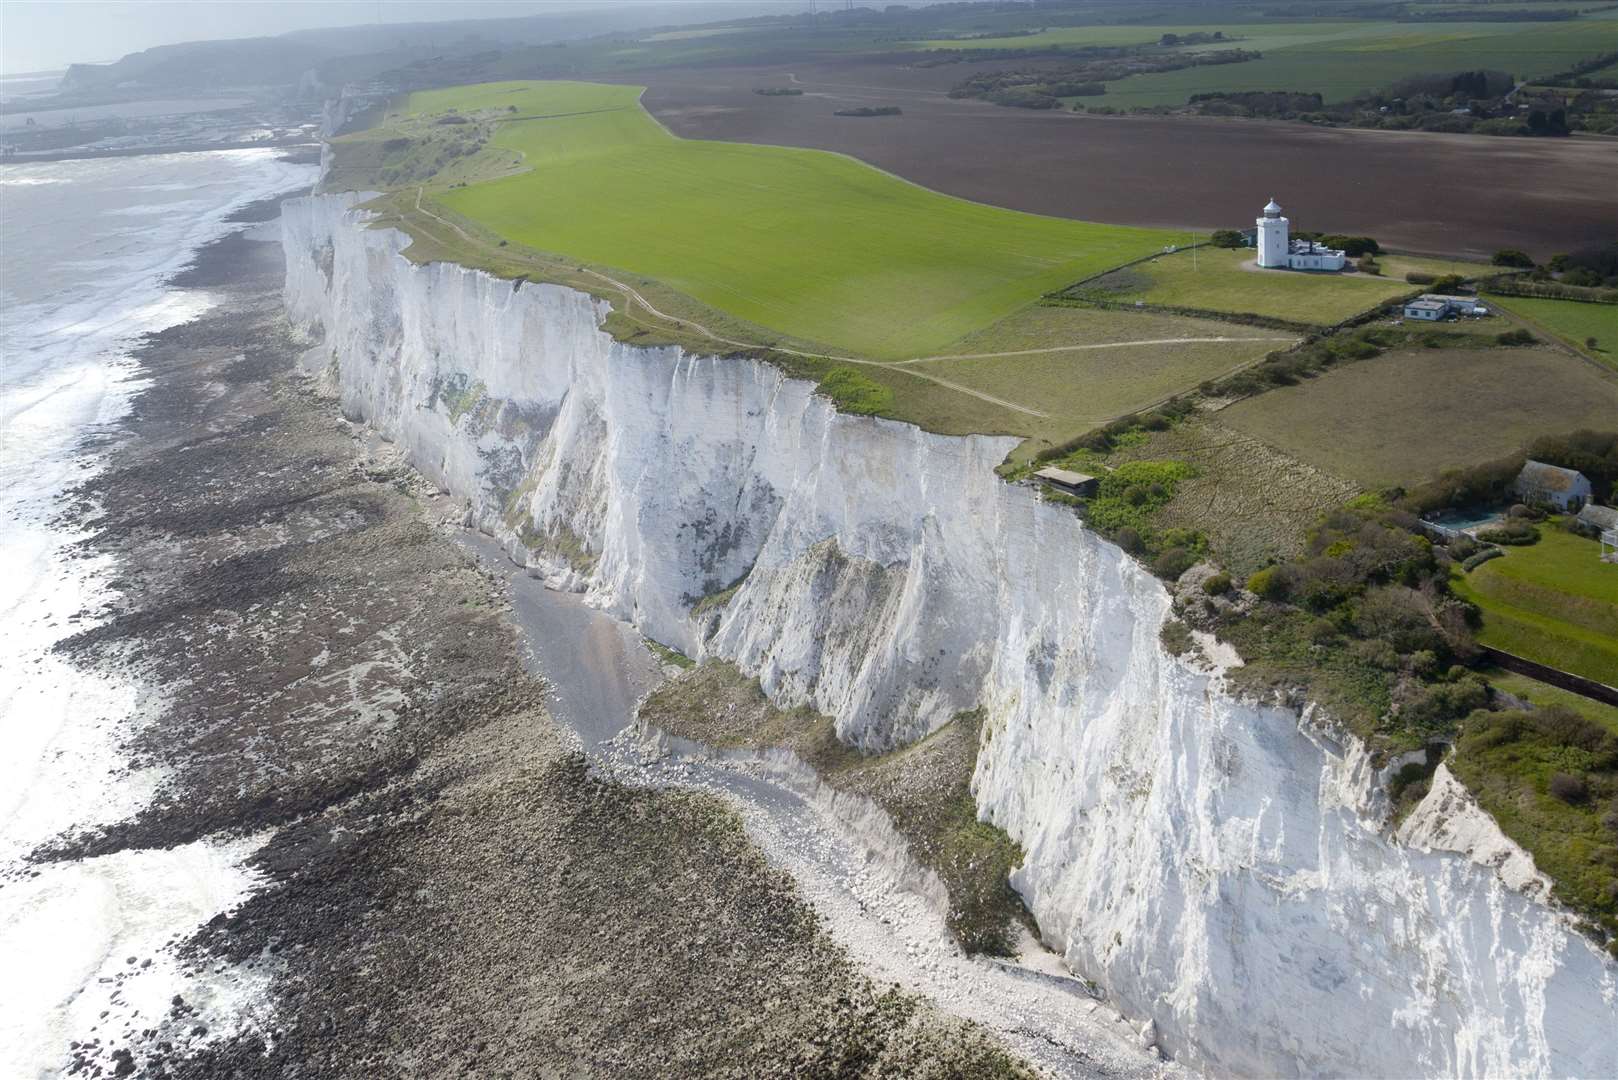 The campaign group says "the White Cliffs are now being replaced by the orange plastics"